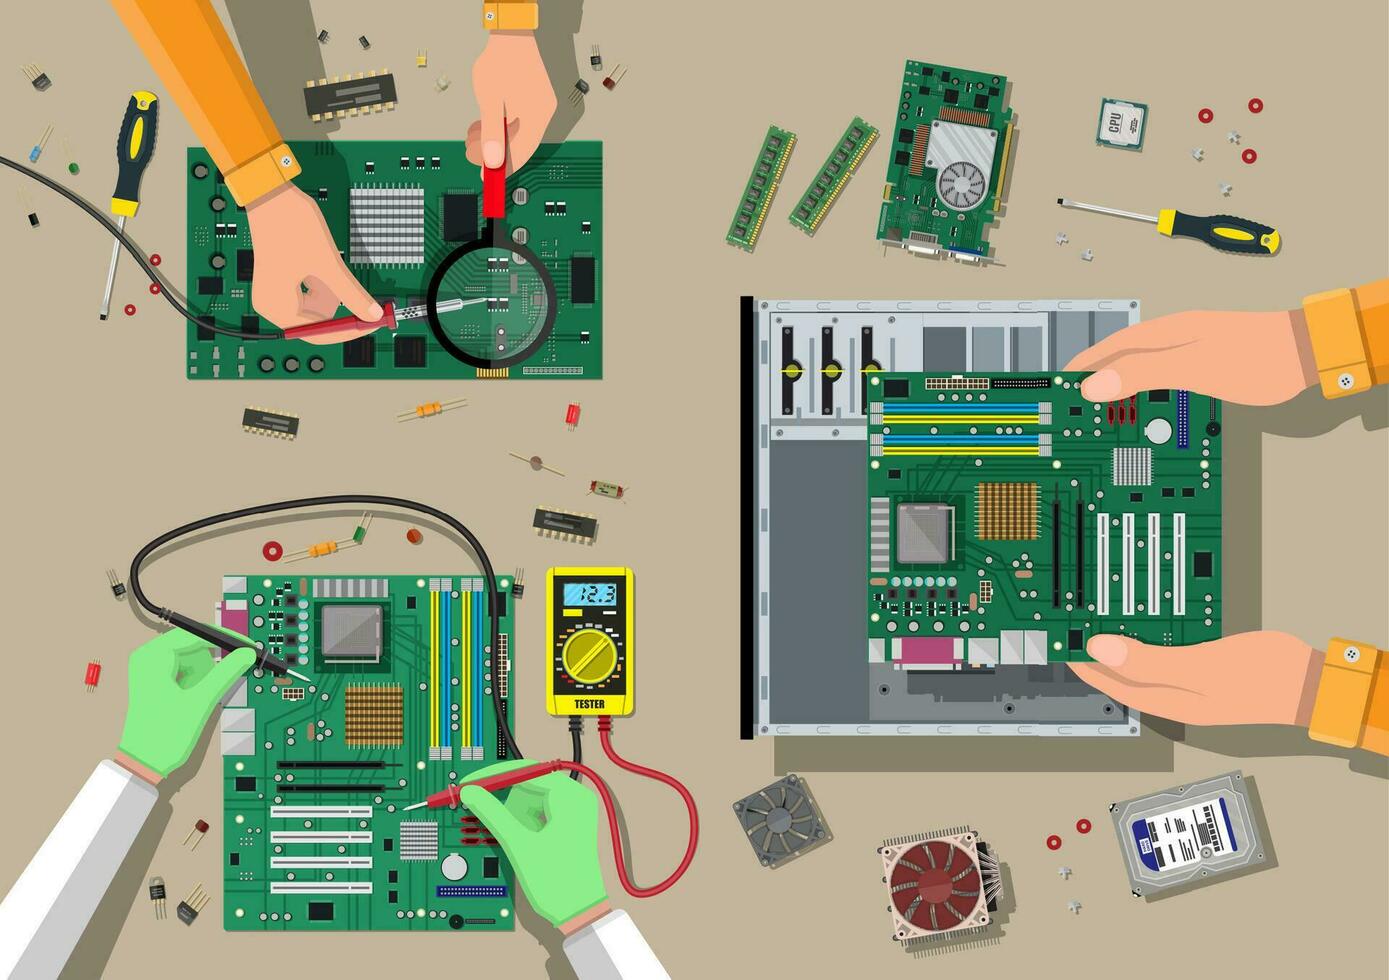 Components for personal computer. Service, recovery, warranty, fixing. Assembling PC. Computer hardware. Vector illustration in flat style